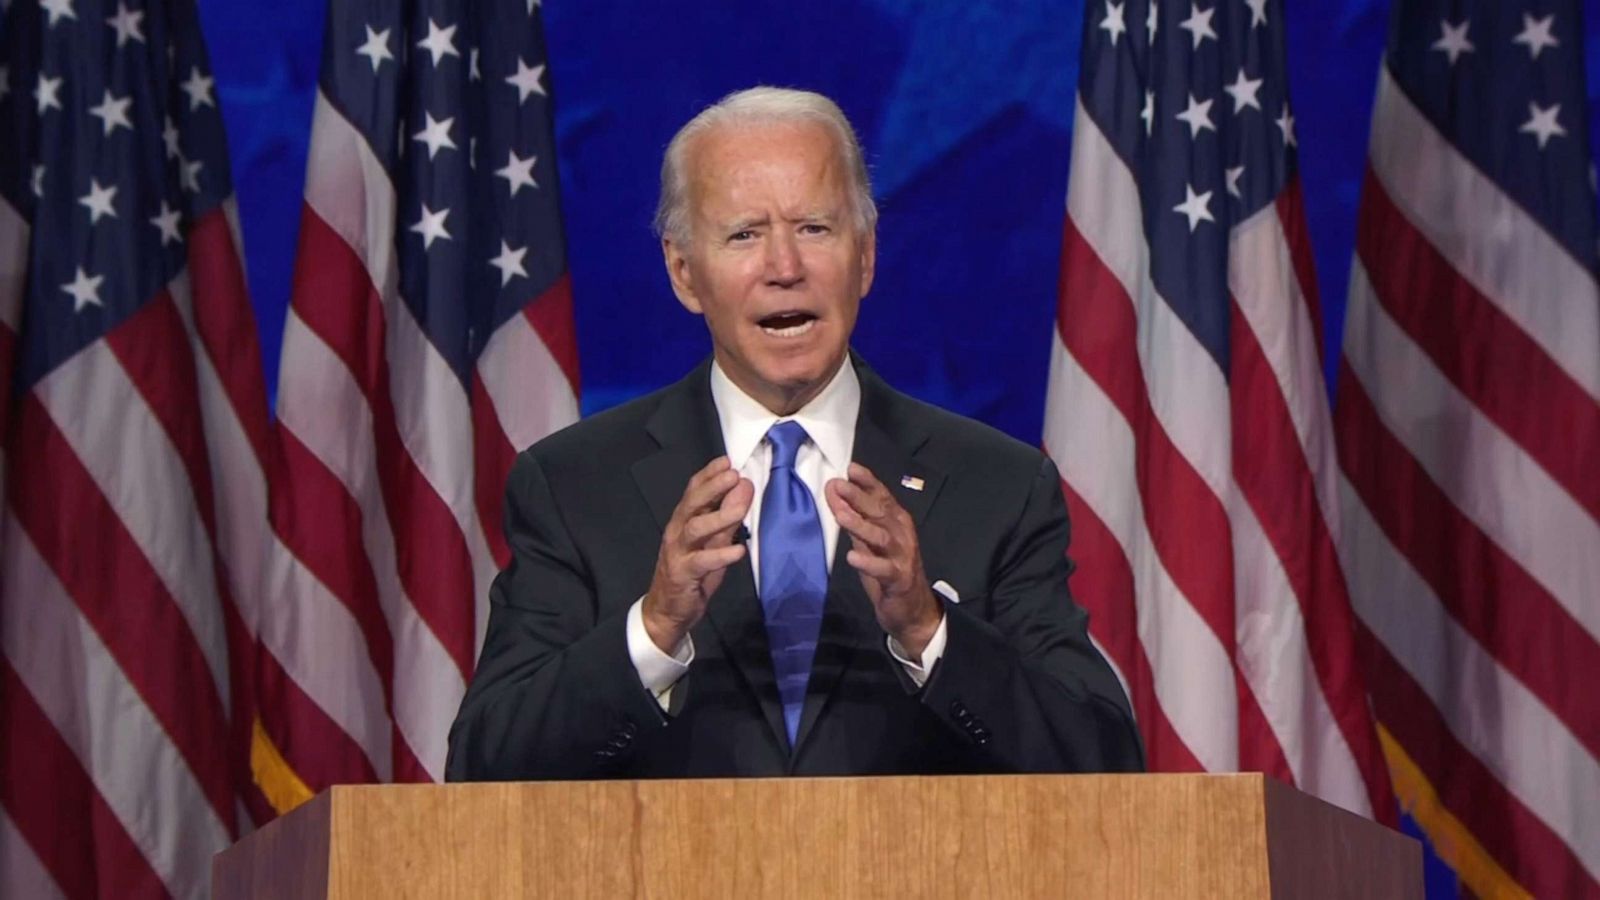 DNC 2020 Day 4: Joe Biden accepts nomination, calls for Americans to join 'battle for the soul of the nation'